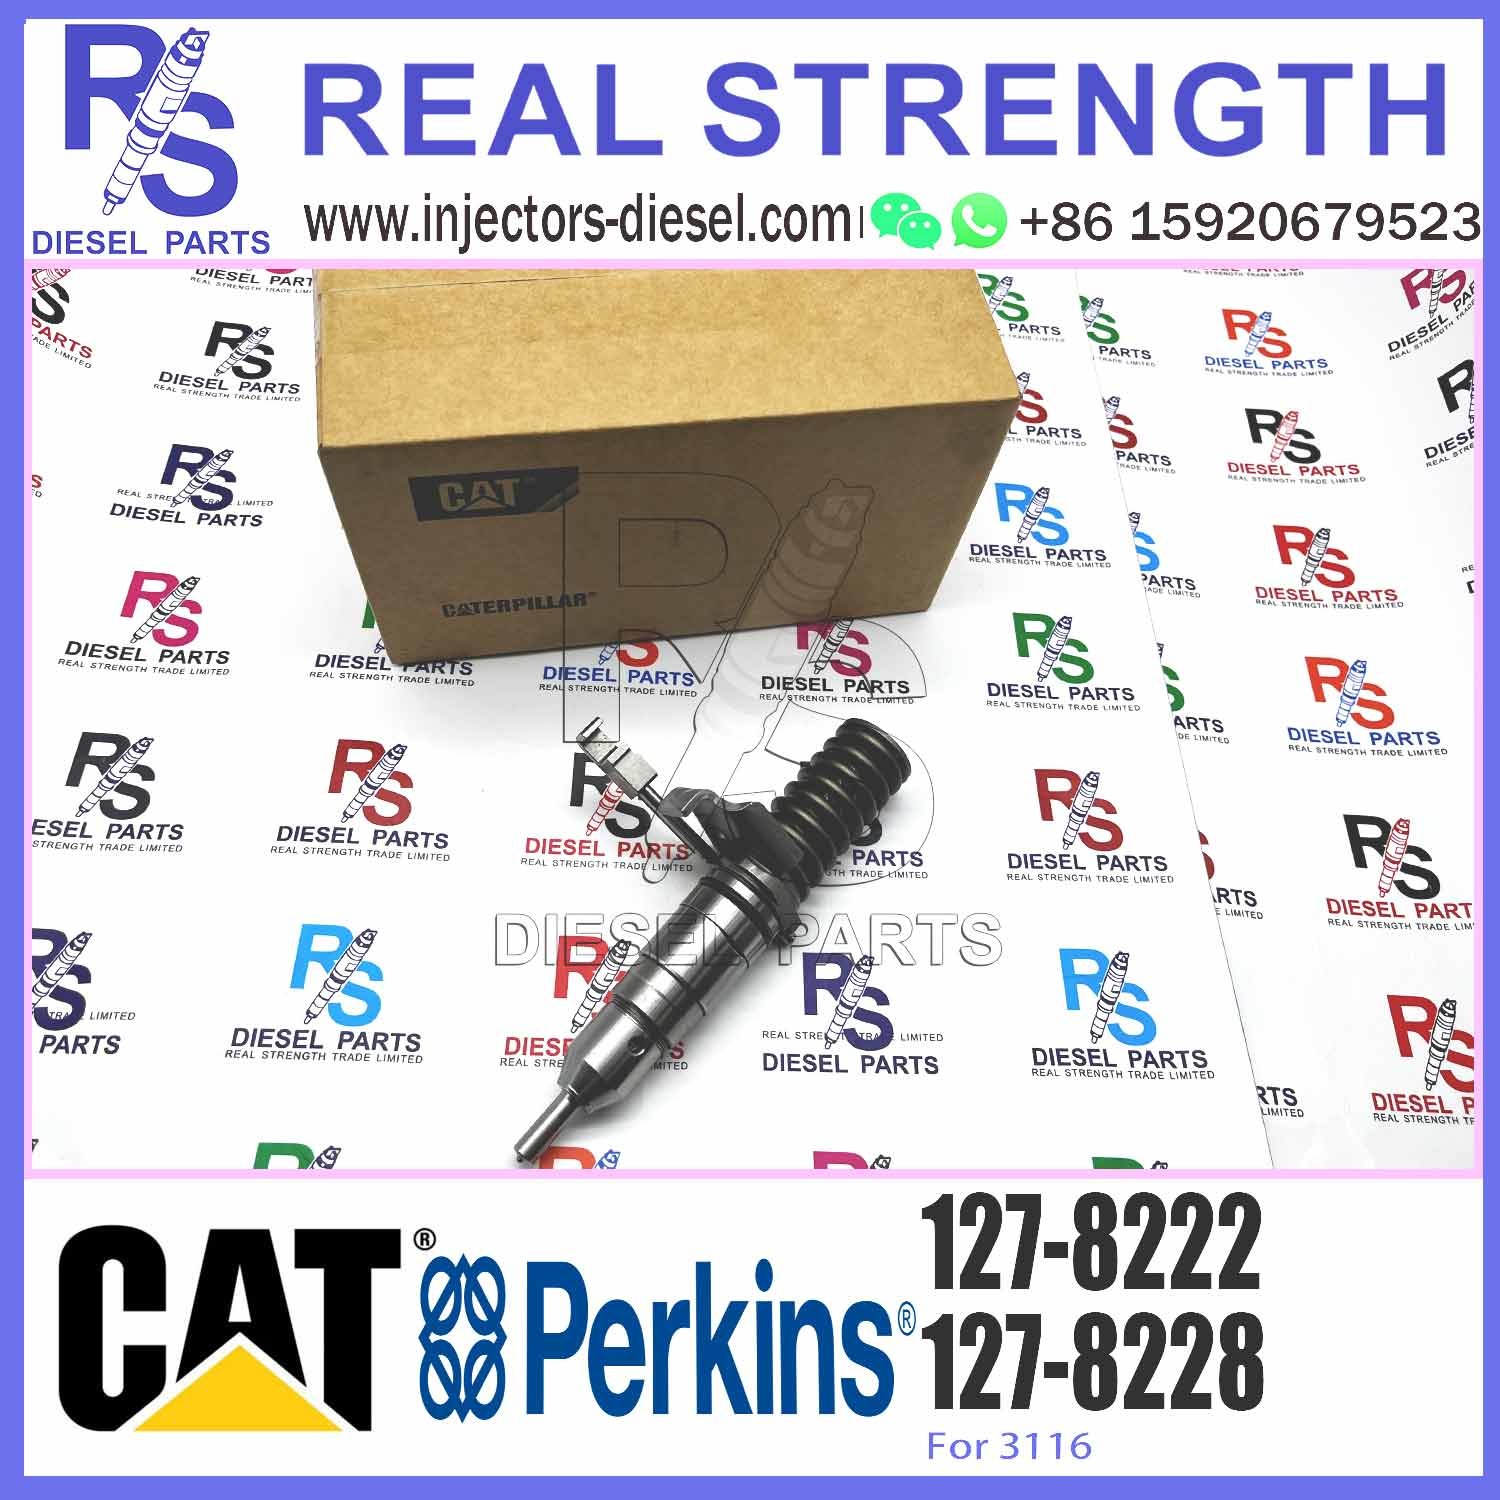 China 162-0212 127-8222 Fuel injector Pump 162 0212 127 8222 Common Rail Pump Sprayer 1620212 1278222 For Cat Excavator on sale